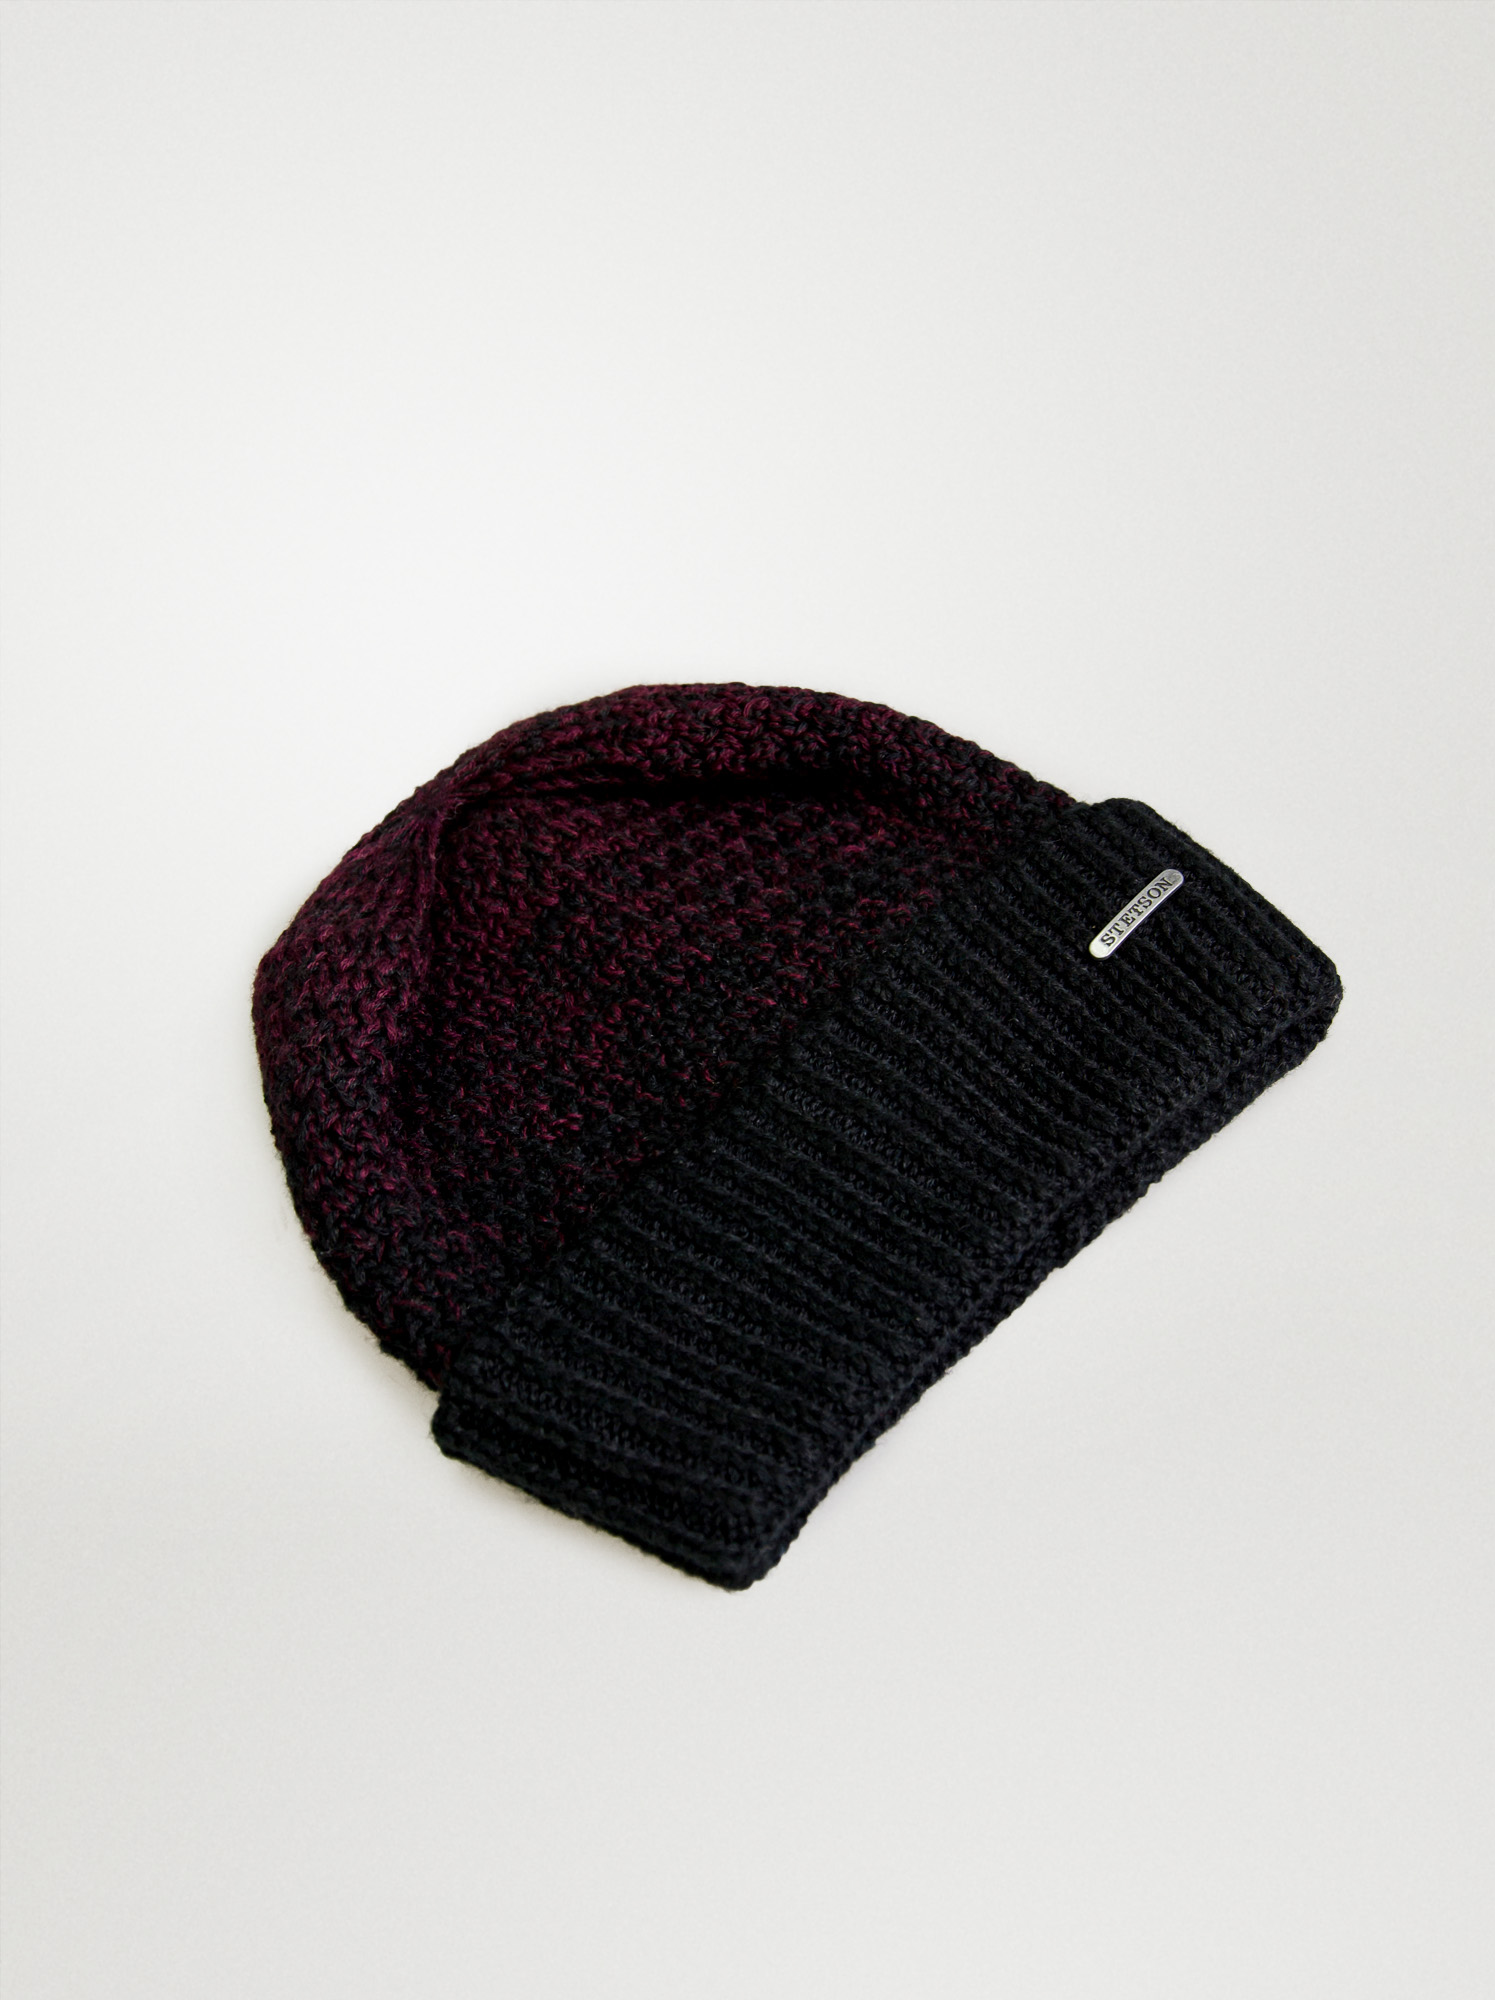 STETSON Beanie hat with wool - Stetson image 2